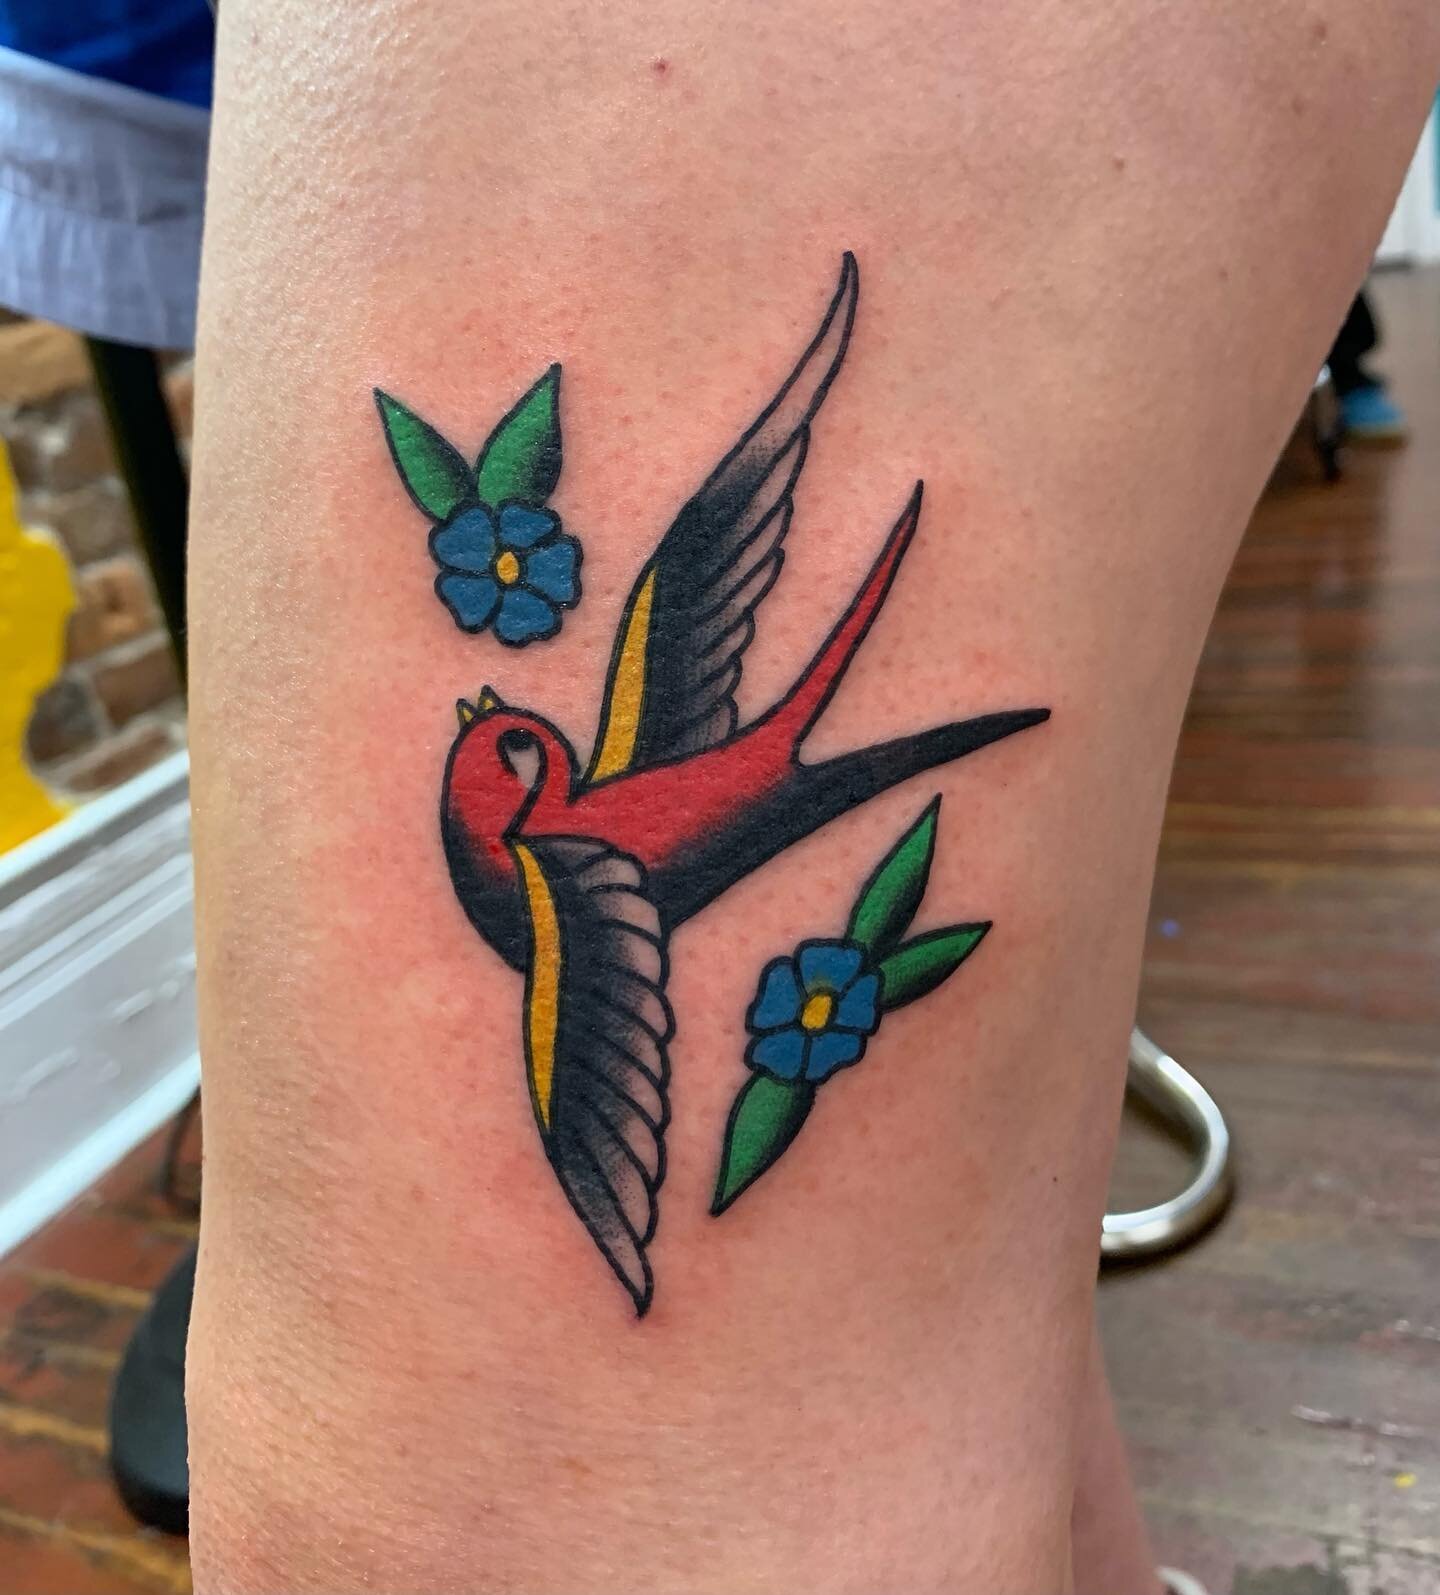 Classic sparrow from @kewbie.108 ! DM him for an appointment, call the shop, or stop by to grab something from him! We&rsquo;re doing walk ins 12-7pm tomorrow and will be closed Wed &amp; Thurs next week. Stay cozy out there!